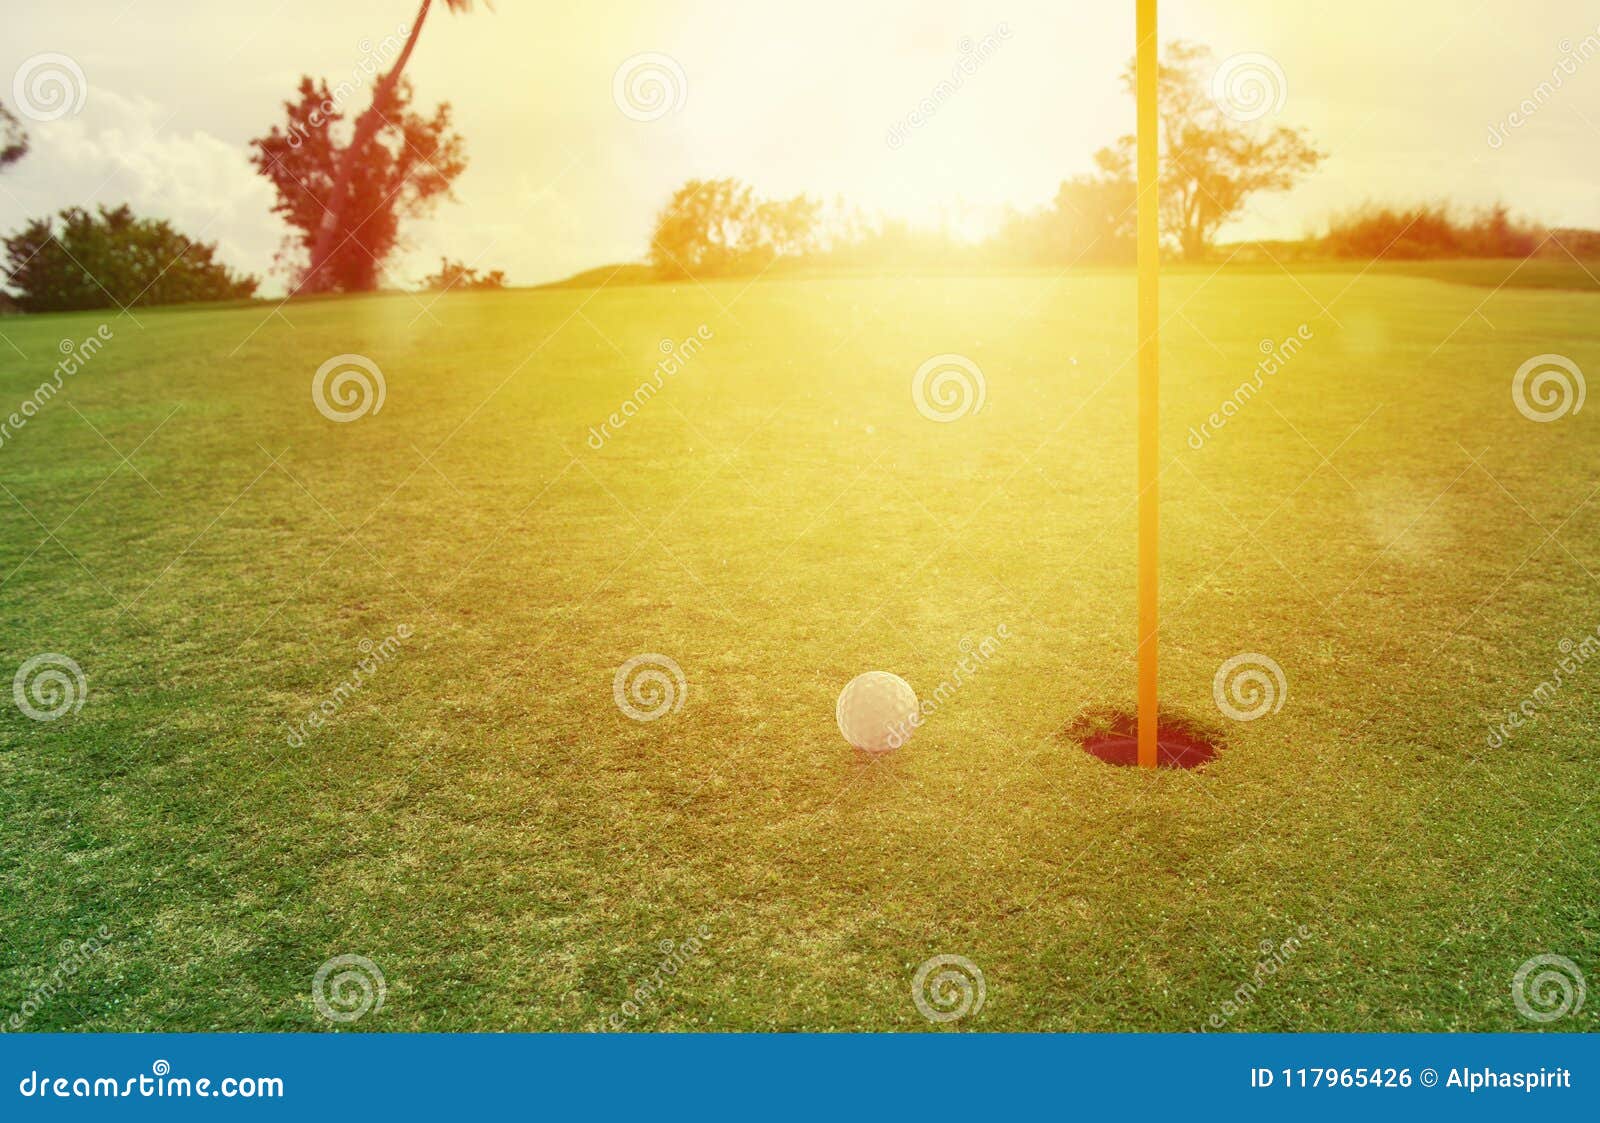 Golf Ball Near The Hole In A Grass Field Stock Photo Image Of Flag